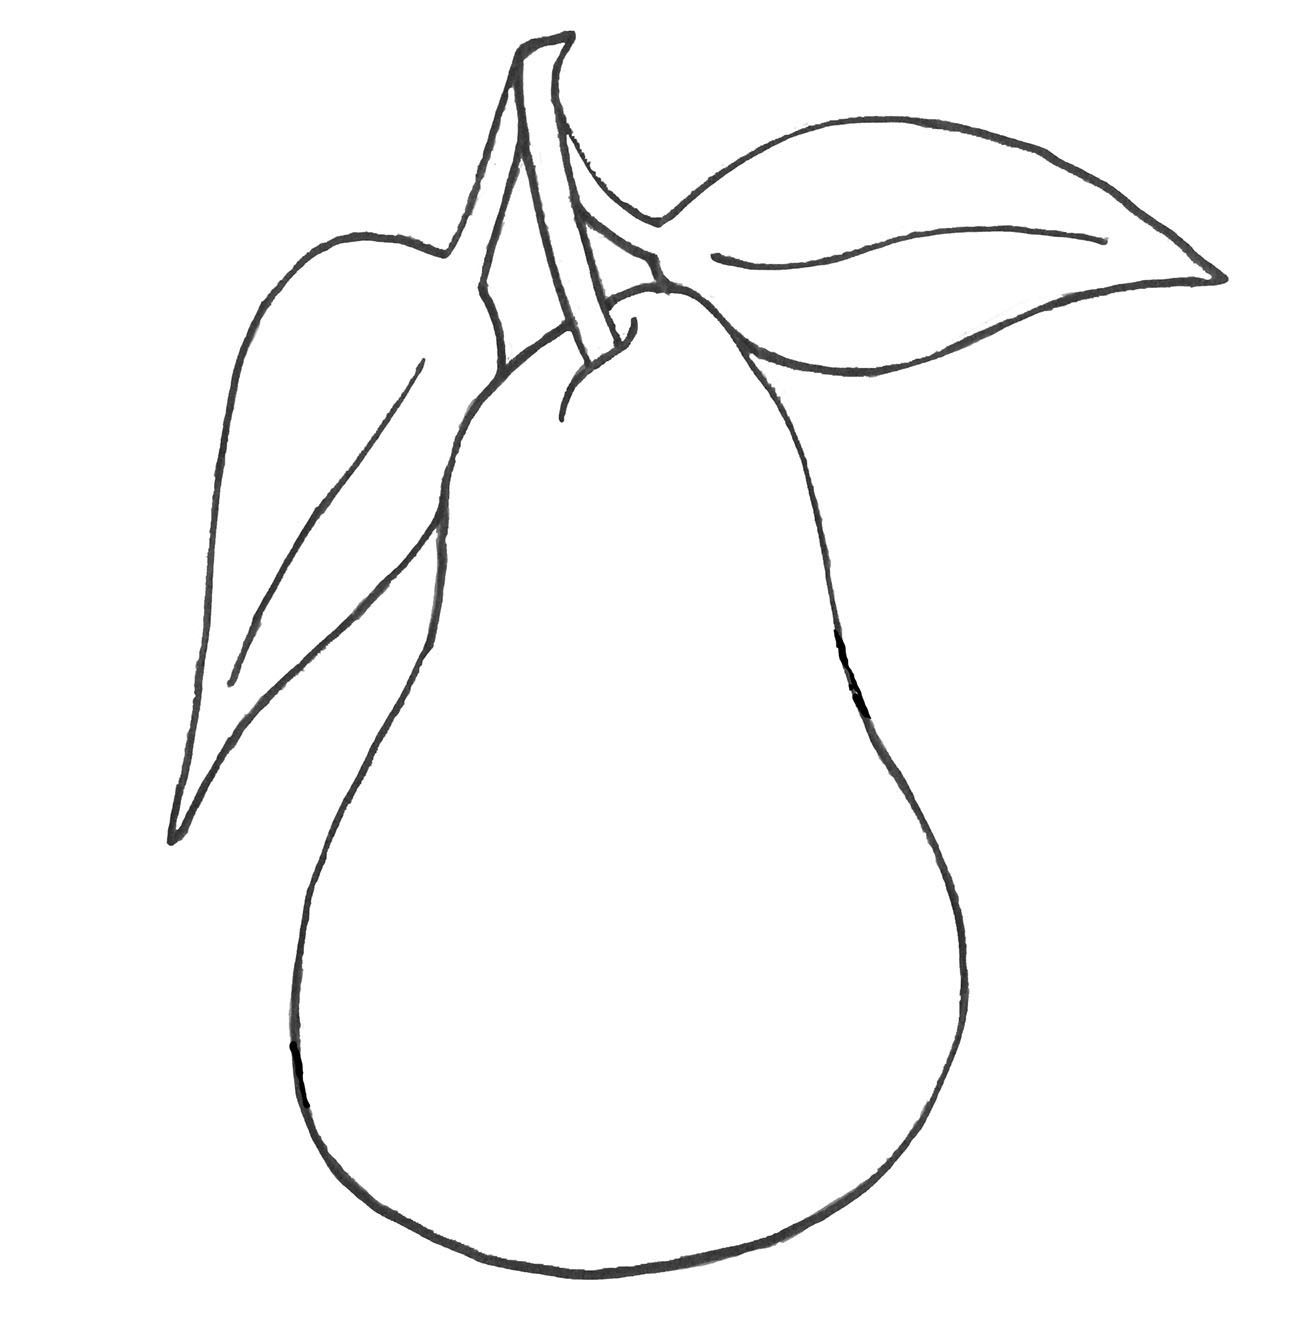 Pear Drawing Easy